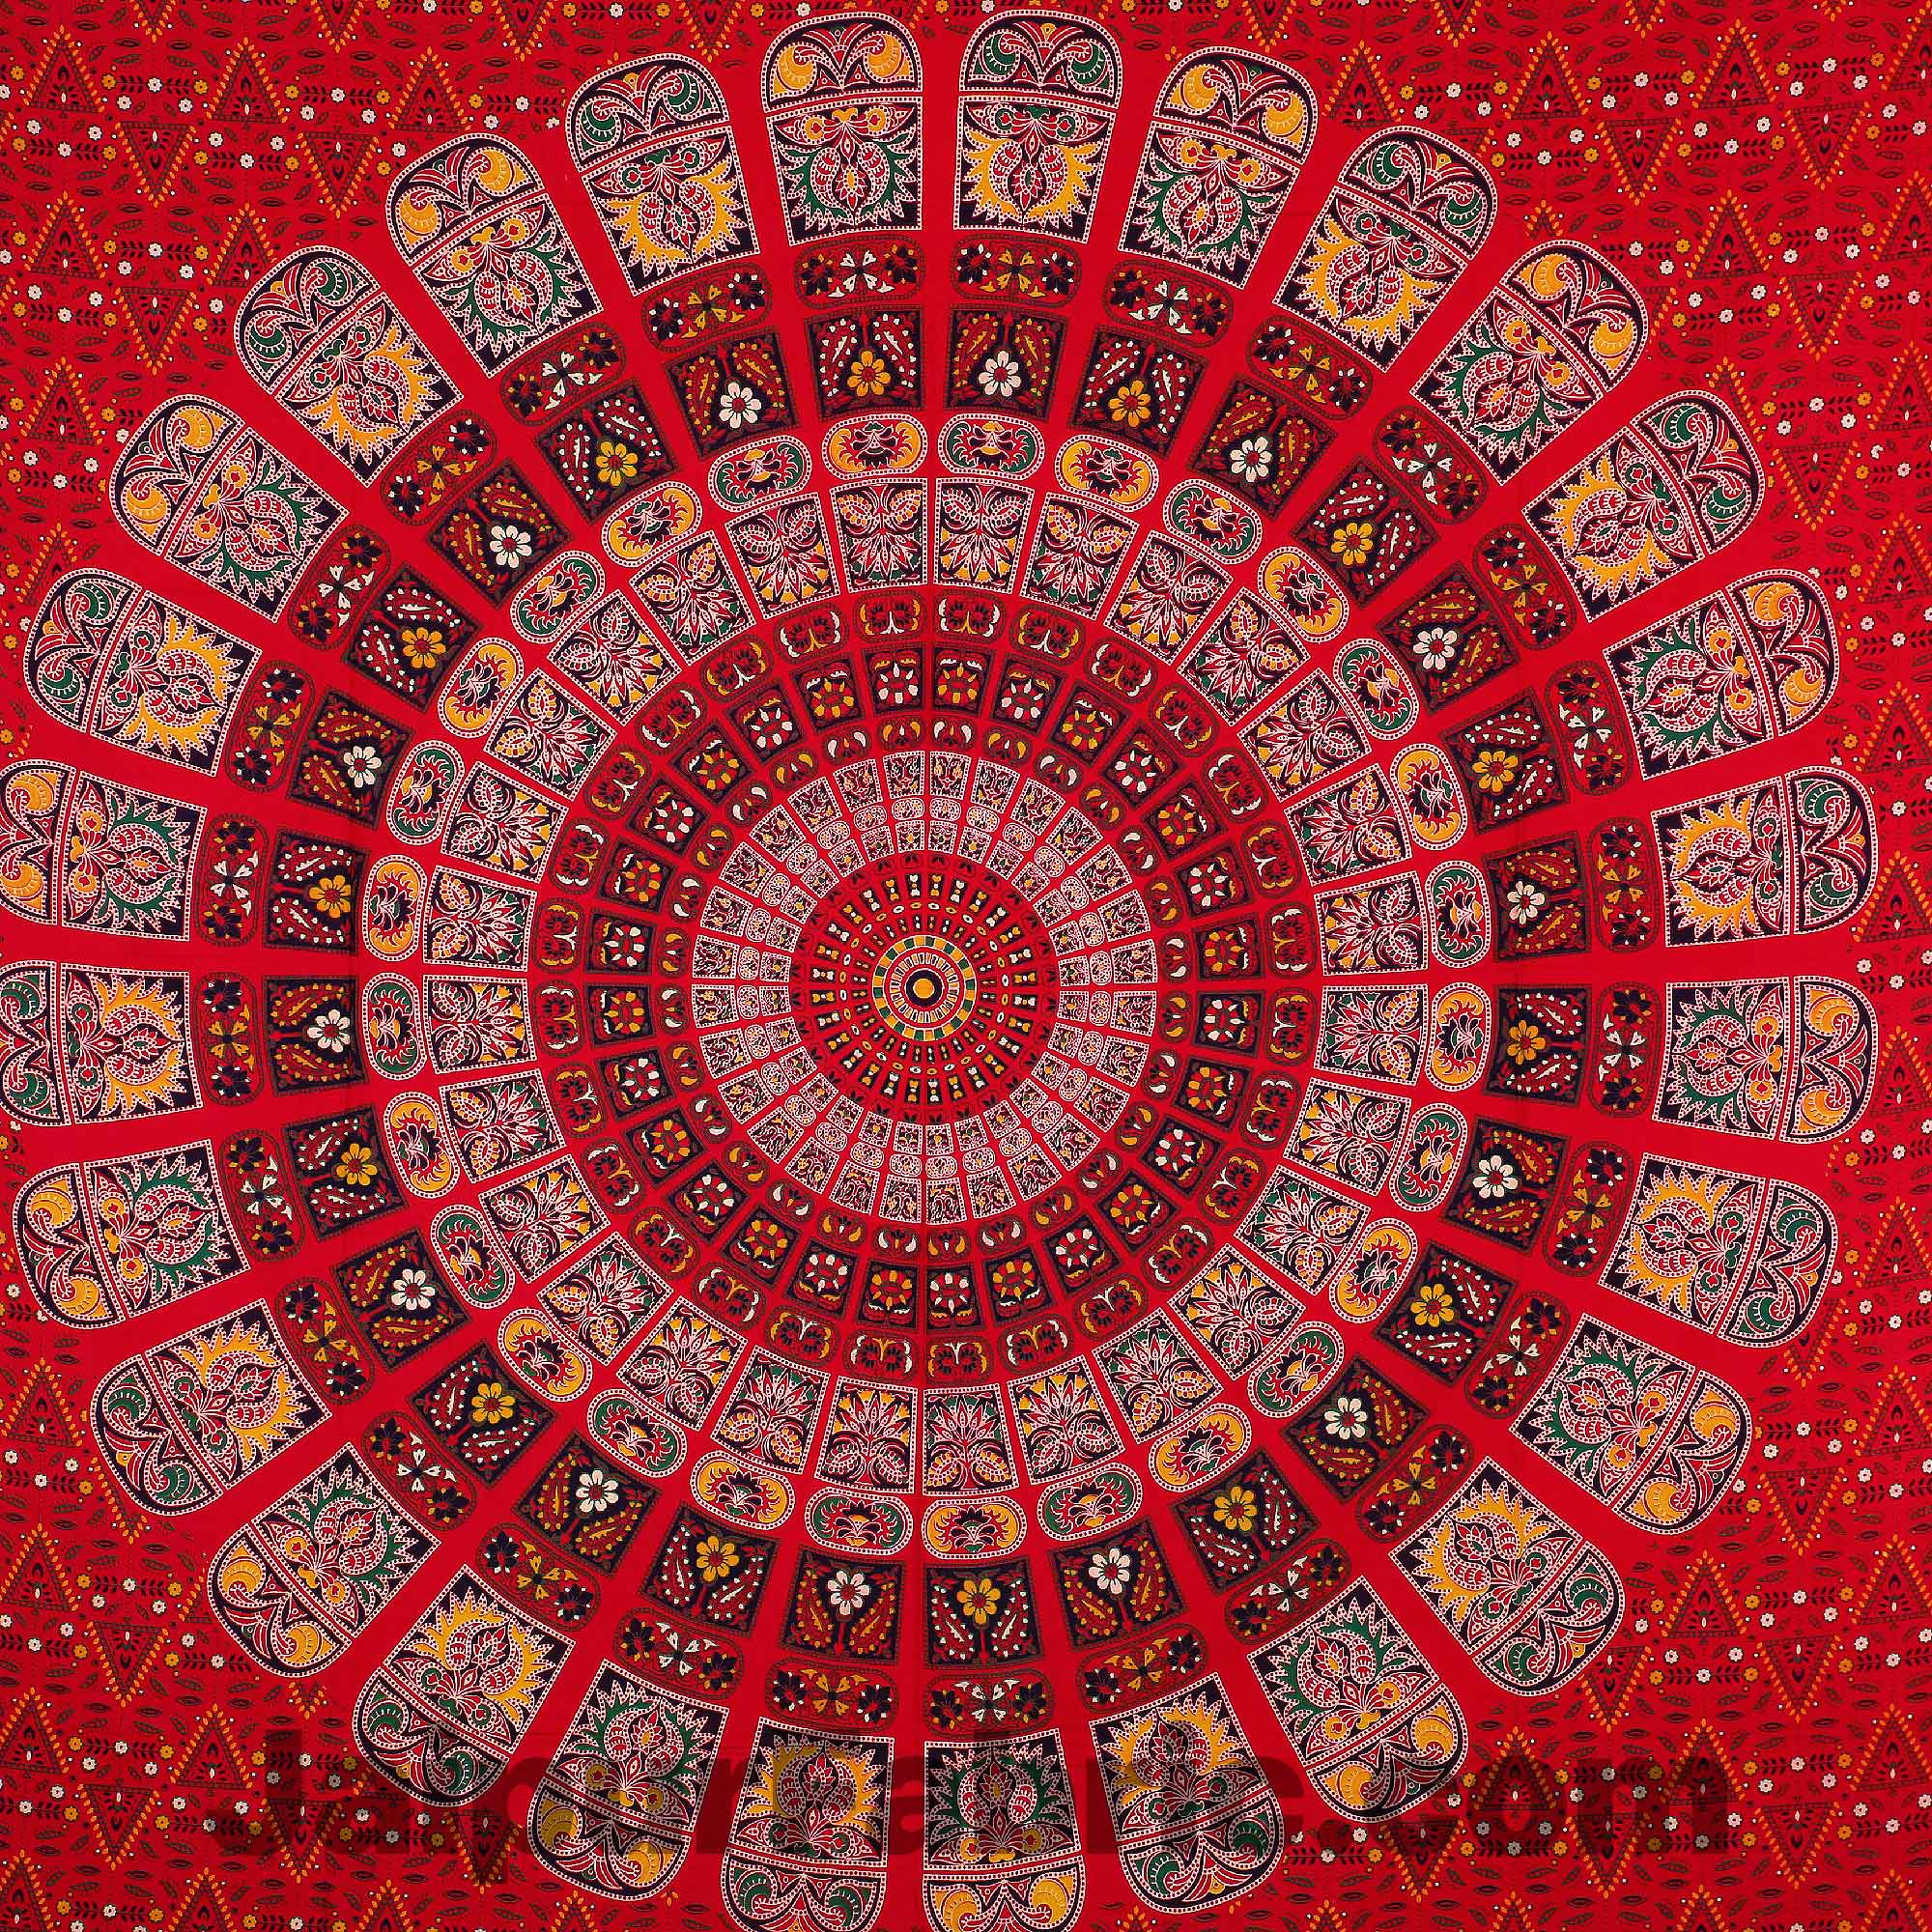 Pure Cotton Red Mandala Zig Zag Print King Size Double Bedsheet With 2 Pillow Covers